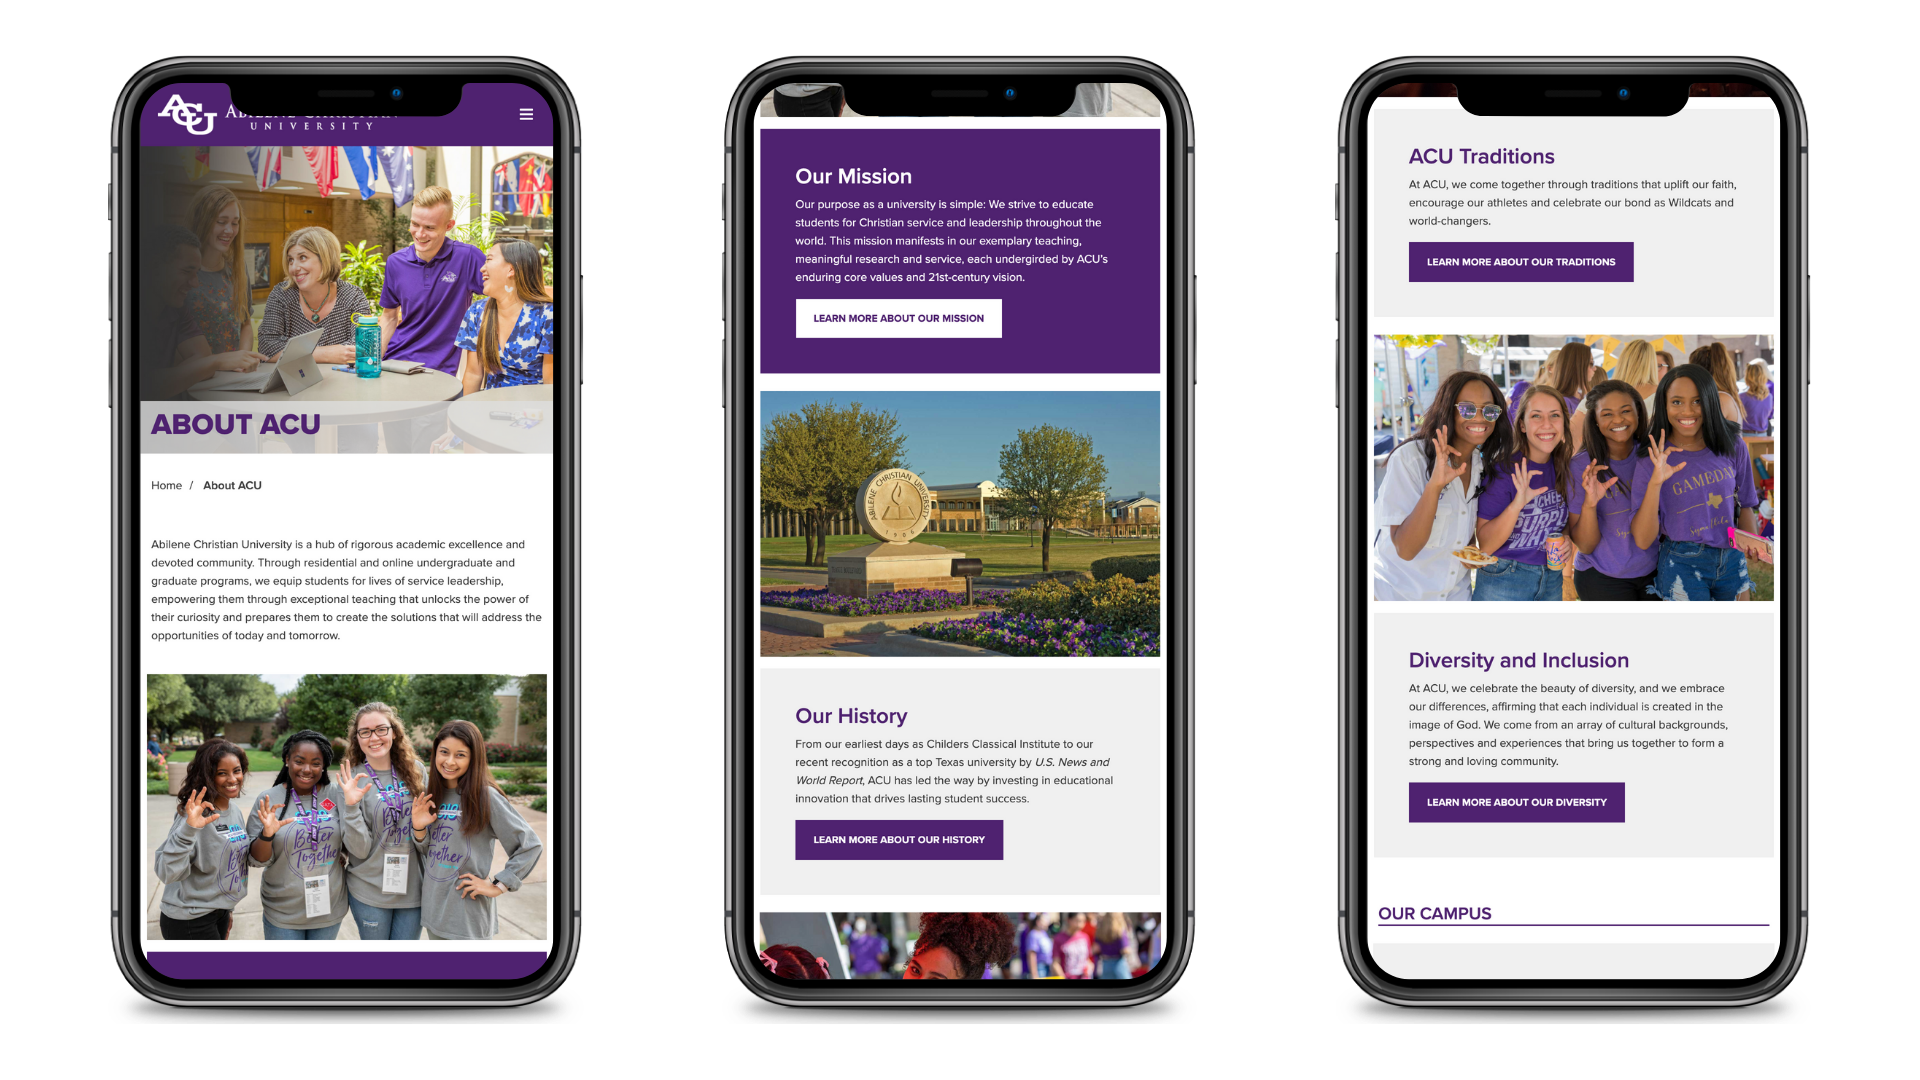 Abilene Christian University's About ACU web page displayed on a phone